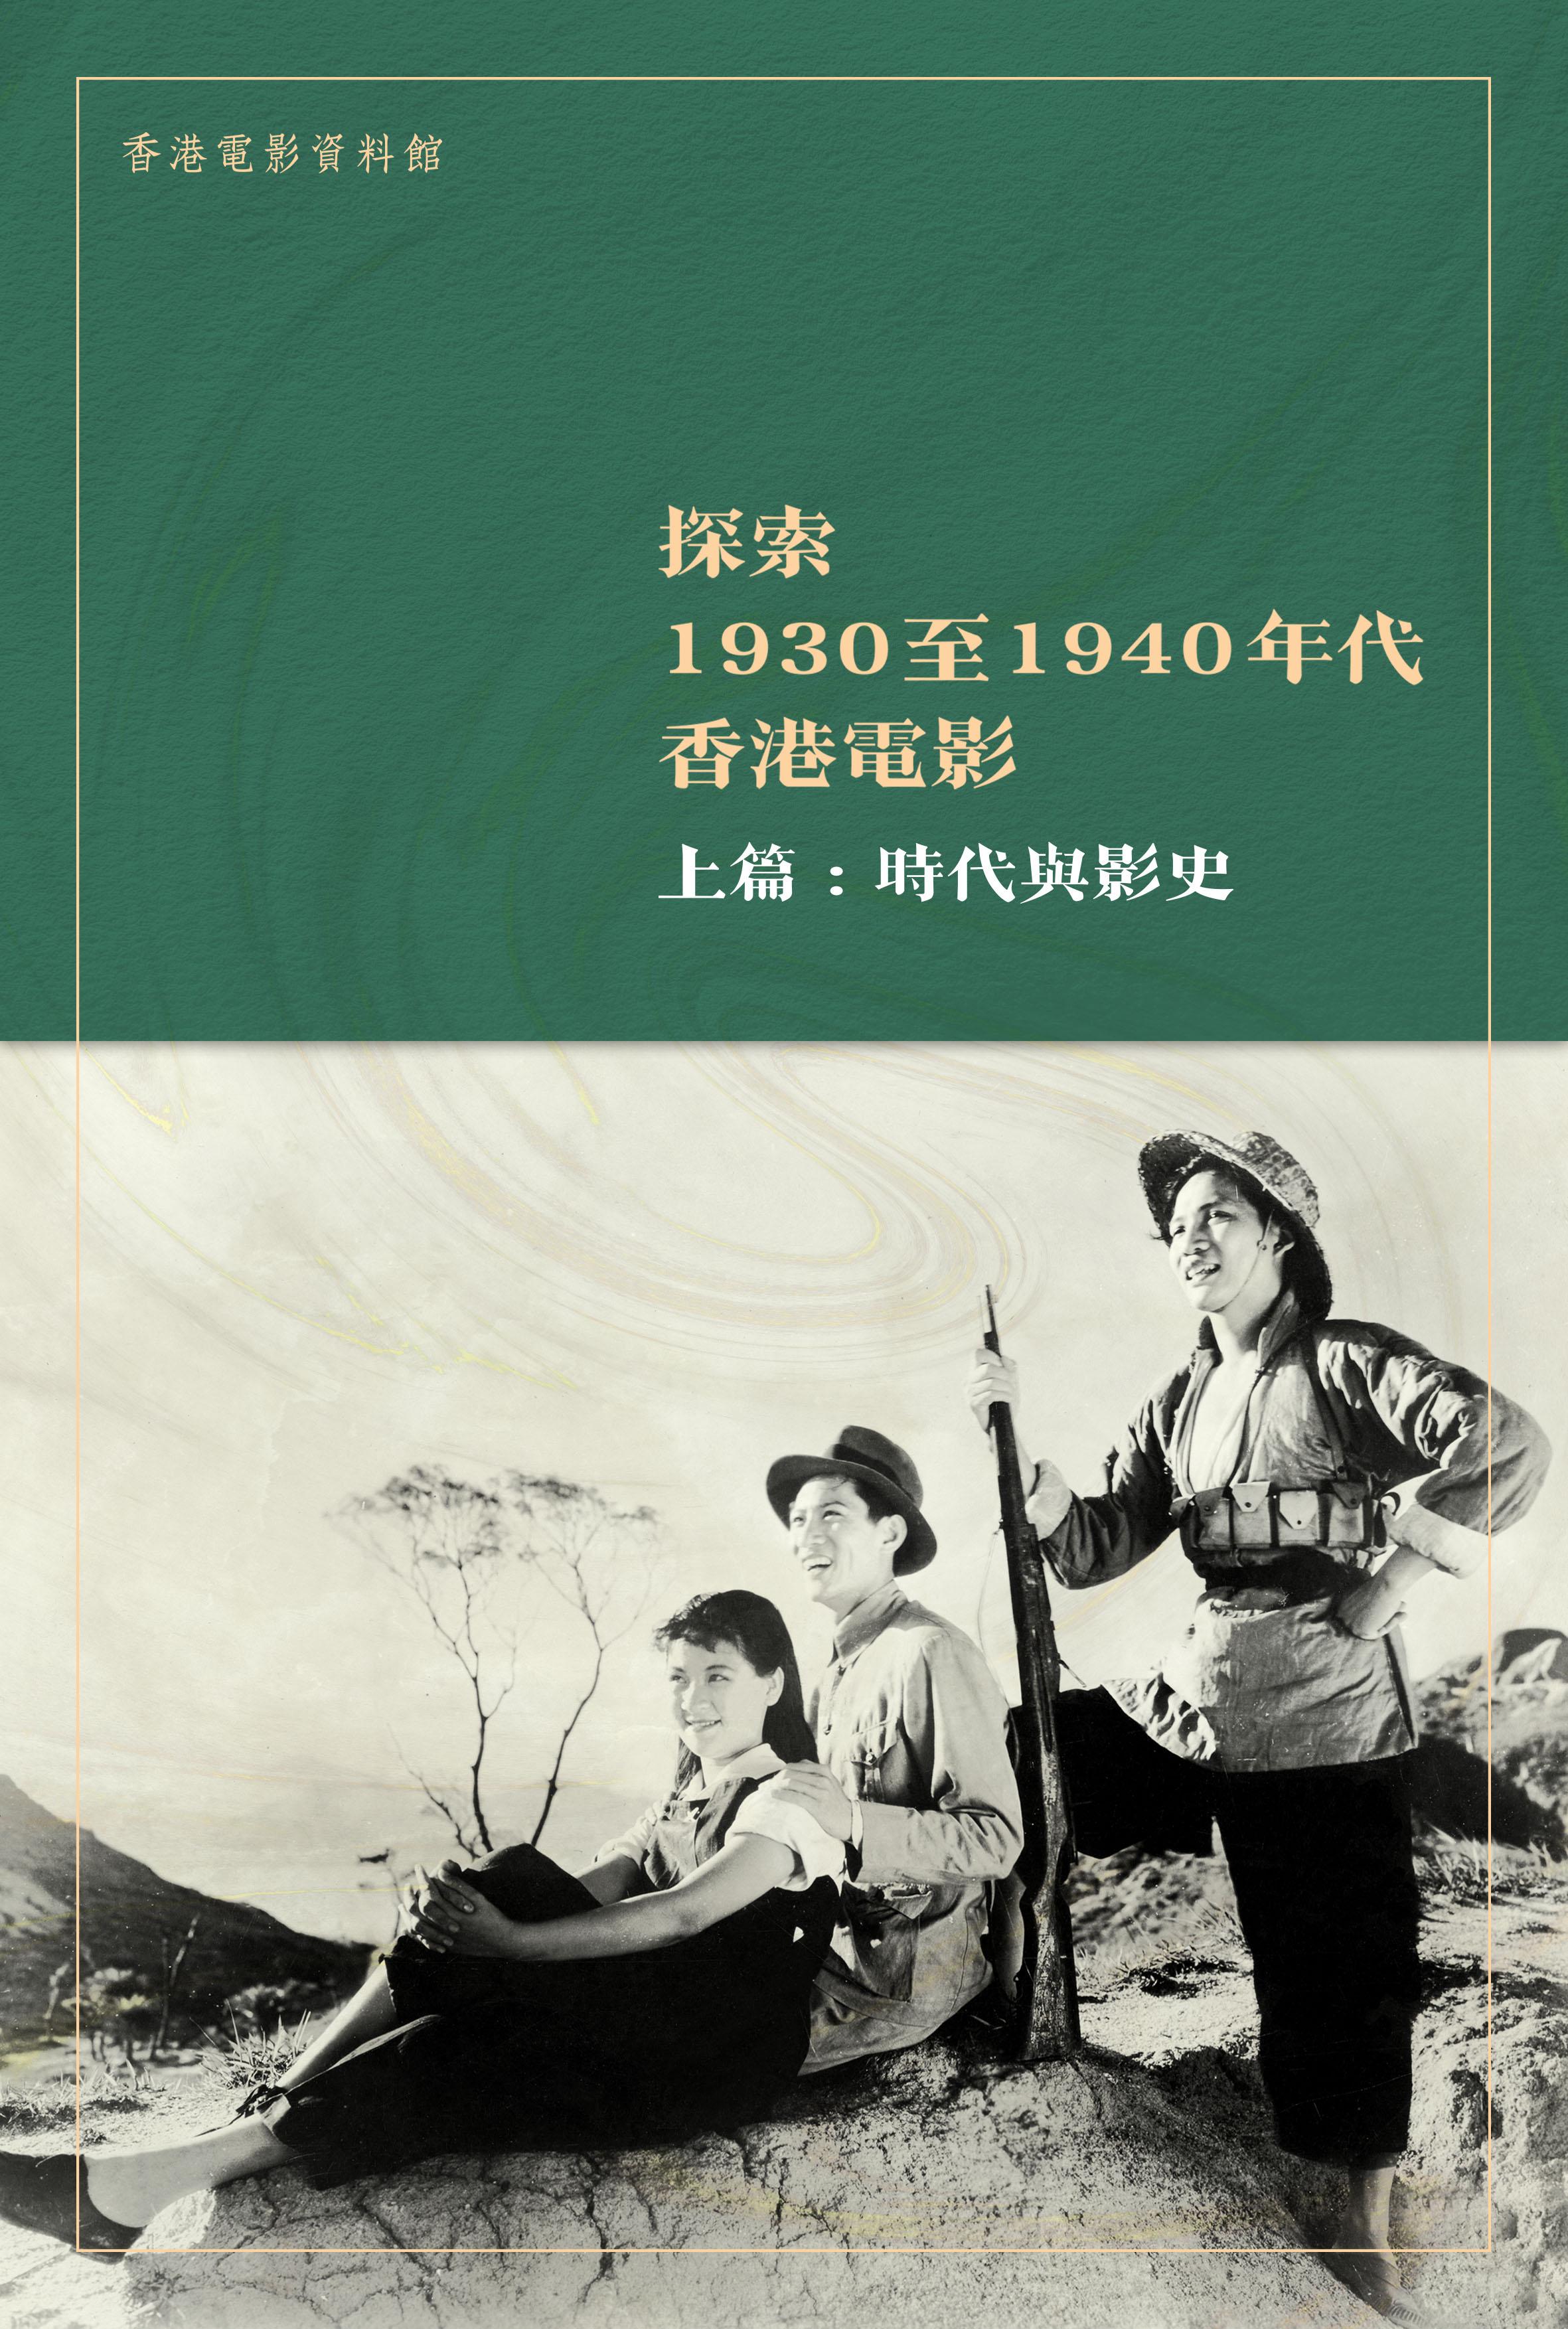 The e-book "Exploring Hong Kong Films of the 1930s and 1940s" (in Chinese only), published by the Hong Kong Film Archive of the Leisure and Cultural Services Department, is now available for free download. "Part 1: Era and Film History" of the publication is an explication of the history of the Hong Kong film industry, exploring how it was influenced by various factors in different eras, as well as how filmmakers adjusted their operational strategies and persisted in their creative work during times of crisis.